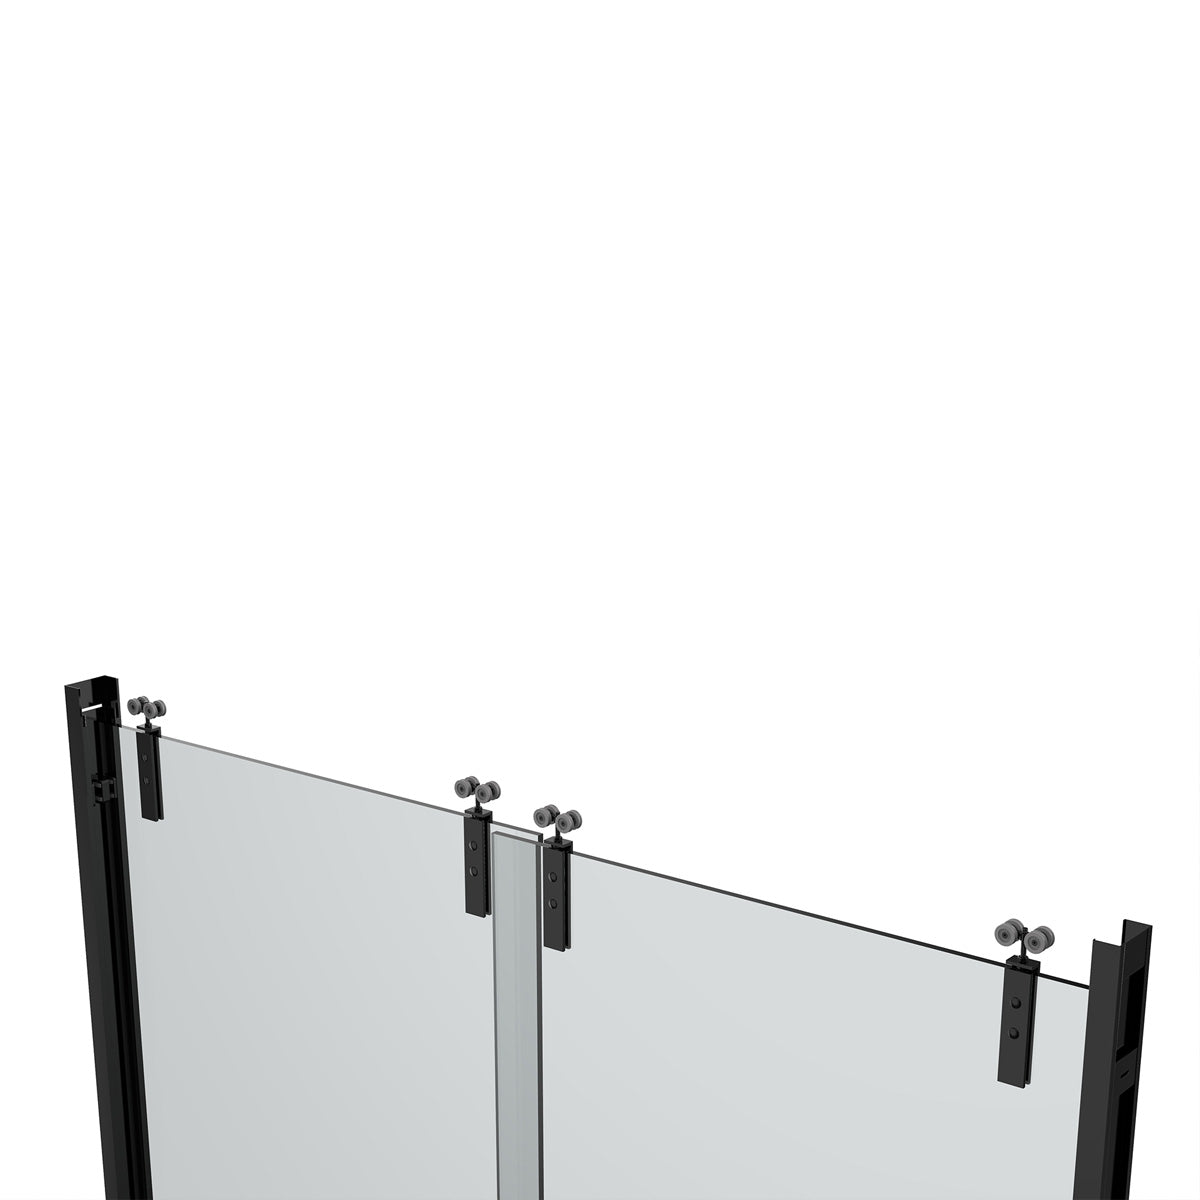 60" Bypass Shower Door with Klearteck Treatment (3/8" Thickness) (Matte Black) AC23 Series - iStyle Bath